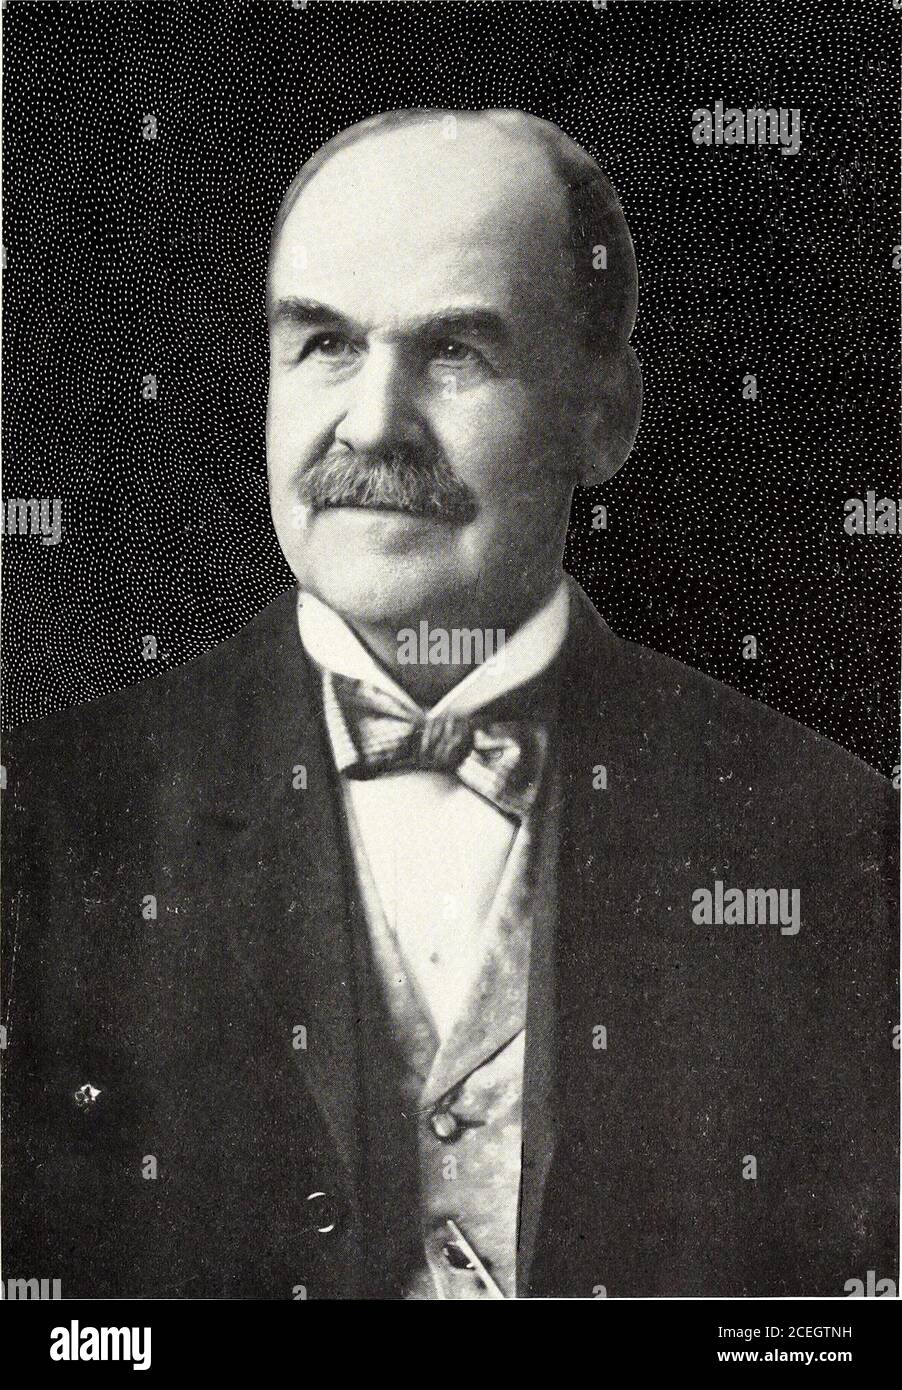 . Notable men of Illinois & their state. C^^^Tt^A^^ 0 •. PHOTO COPYRIGHTED BY MOFFETT, 1907 HOPKINS, ALBERT J., Uiwyer. Chicago and Aurora: b. De Kalb Co., 111., Aug. 1.5, 1846; A. B. Hillsdale (Mich.)Coll., 1870; adm. to bar and practiced at Aurora, 111. and Chicago; states atty. Kane Co., 111., 1872-6; mem,repub. state central com., 1878-SO; presidential elector, 1884; mem. 49th to 57th congresses (1885-1903), 8th111. dist.; U. S. Senator from 111.. 190:^-9; supported by repub. congressional delegation of III. as candidate forspeaker 56th congress; mem. Hrm of Hopkins, Peffers& Hopkins,Chica Stock Photo